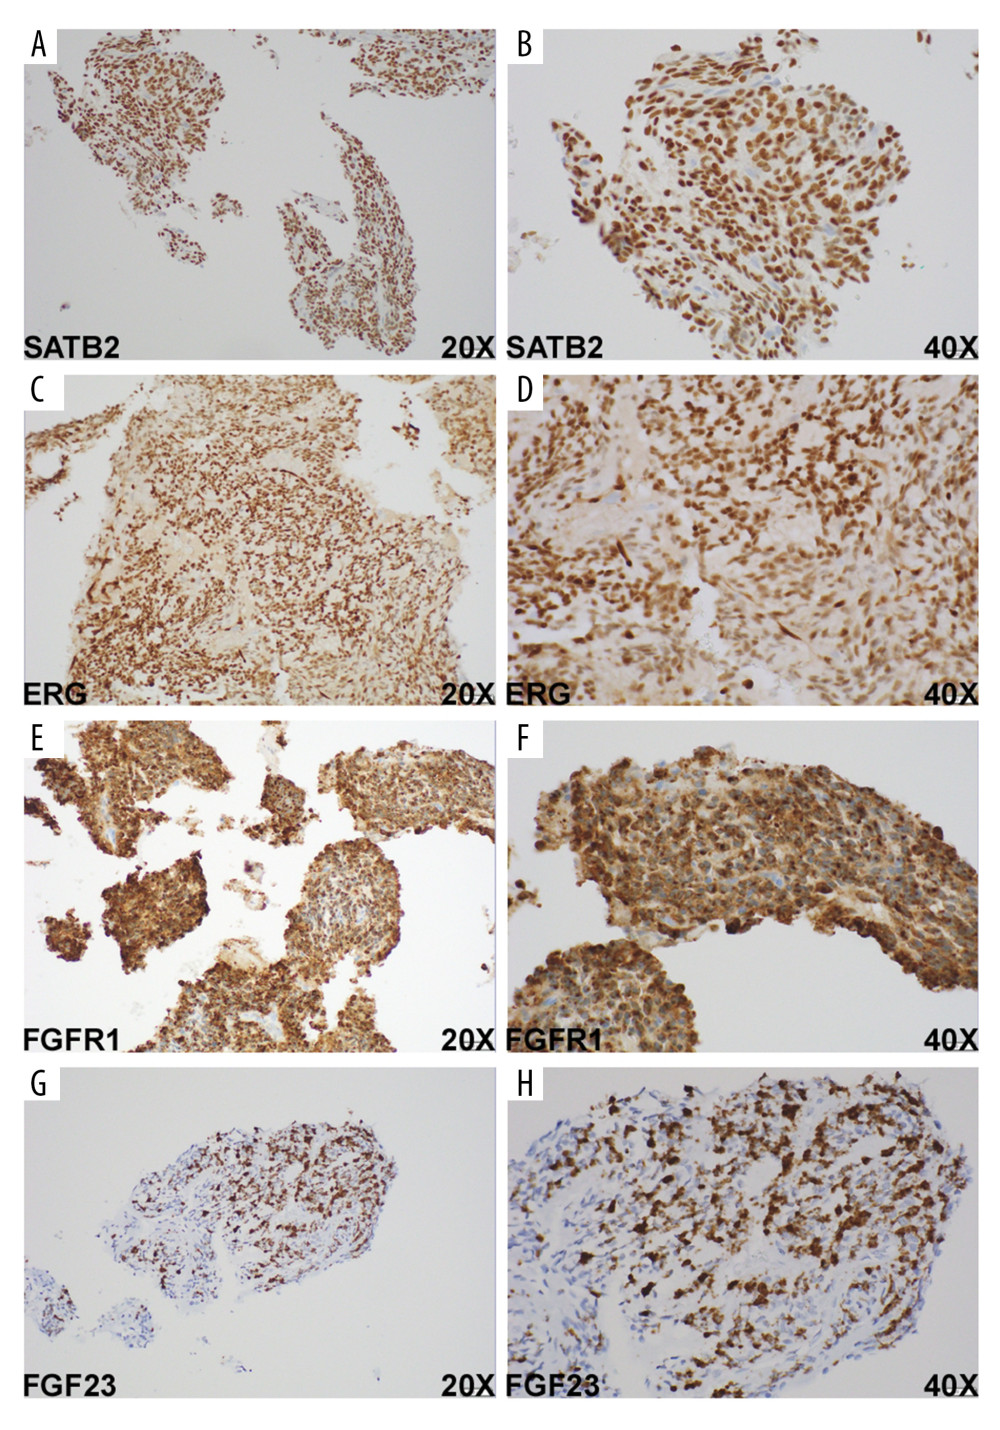 Immunostain findings of the right femur lesion. (A, B) The tumor cells are positive for SATB2 (nuclear staining), 20× (A) and 40× (B). (C, D) The tumor cells are positive for ERG (nuclear staining), 20× (C), and 40× (D). (E, F) The tumor cells are positive for FGFR1 (cytoplasmic and perinuclear staining), 20× (E), and 40× (F). (G, H) In situ hybridization (ISH) shows the tumor cells are positive for FGF23 (cytoplasmic and nuclear staining), 20× (G), and 40× (H).